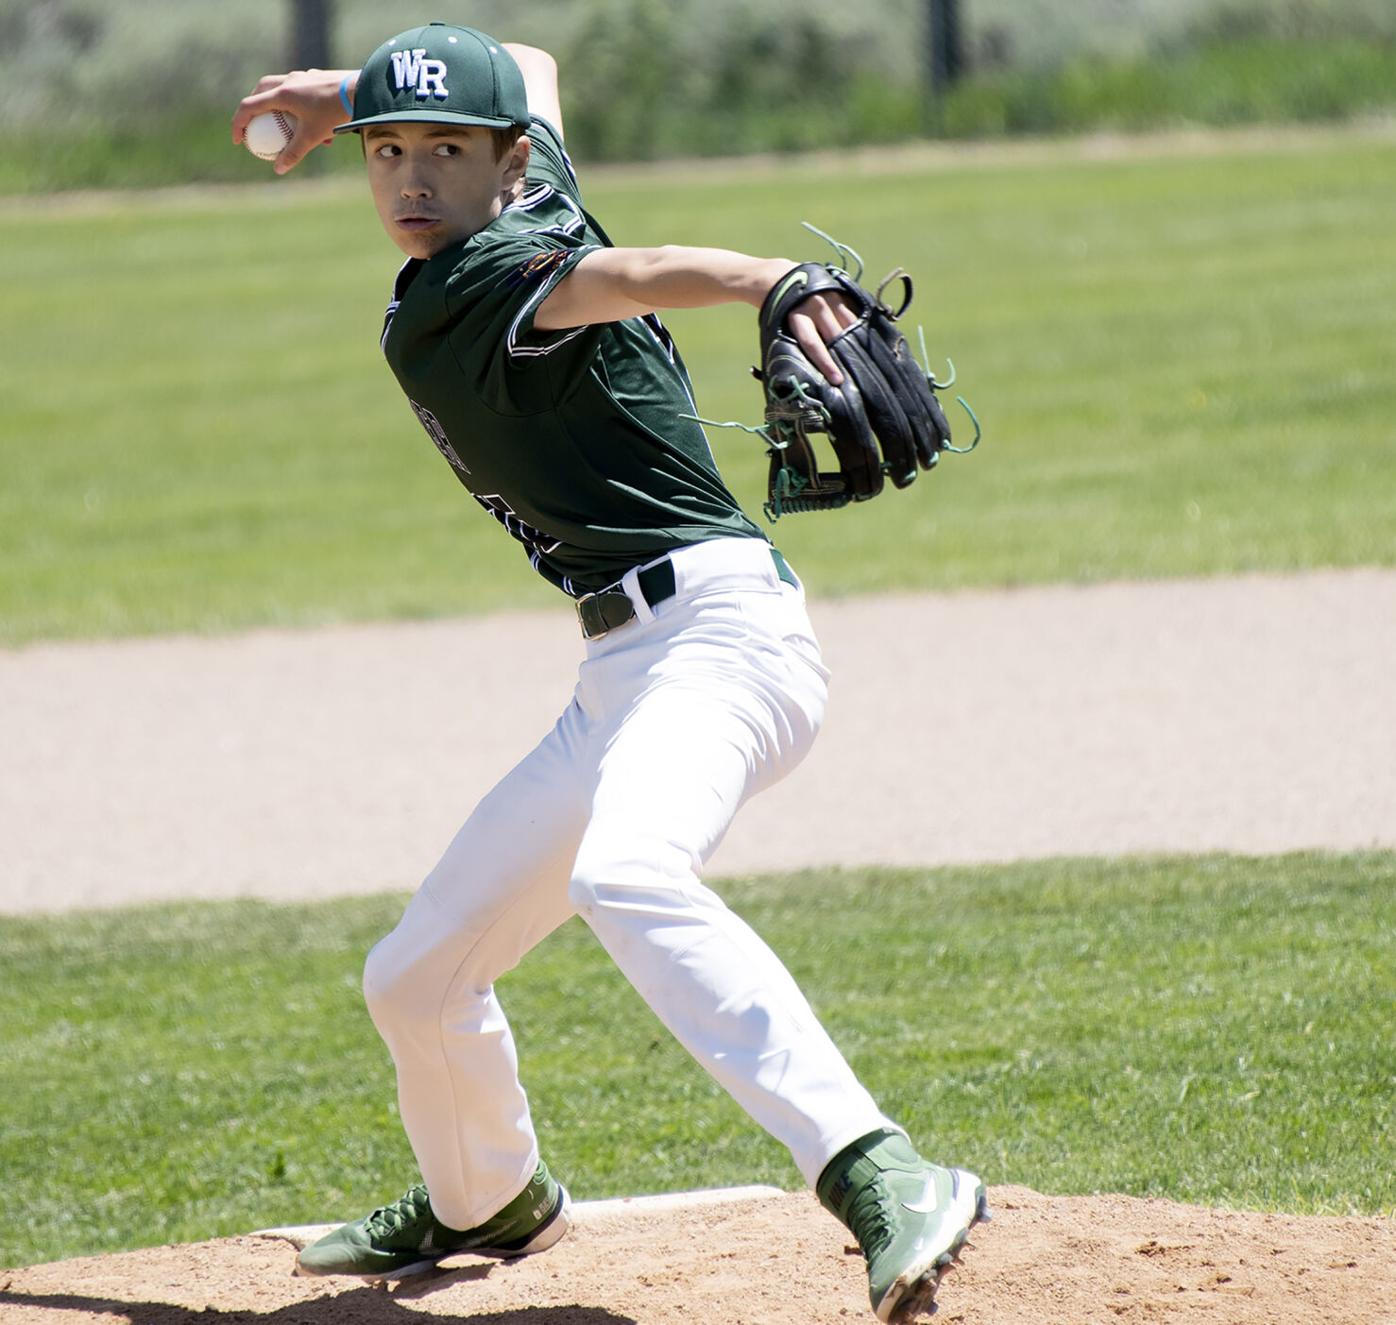 Game of baseball was good to Union's Salmen, Local Sports